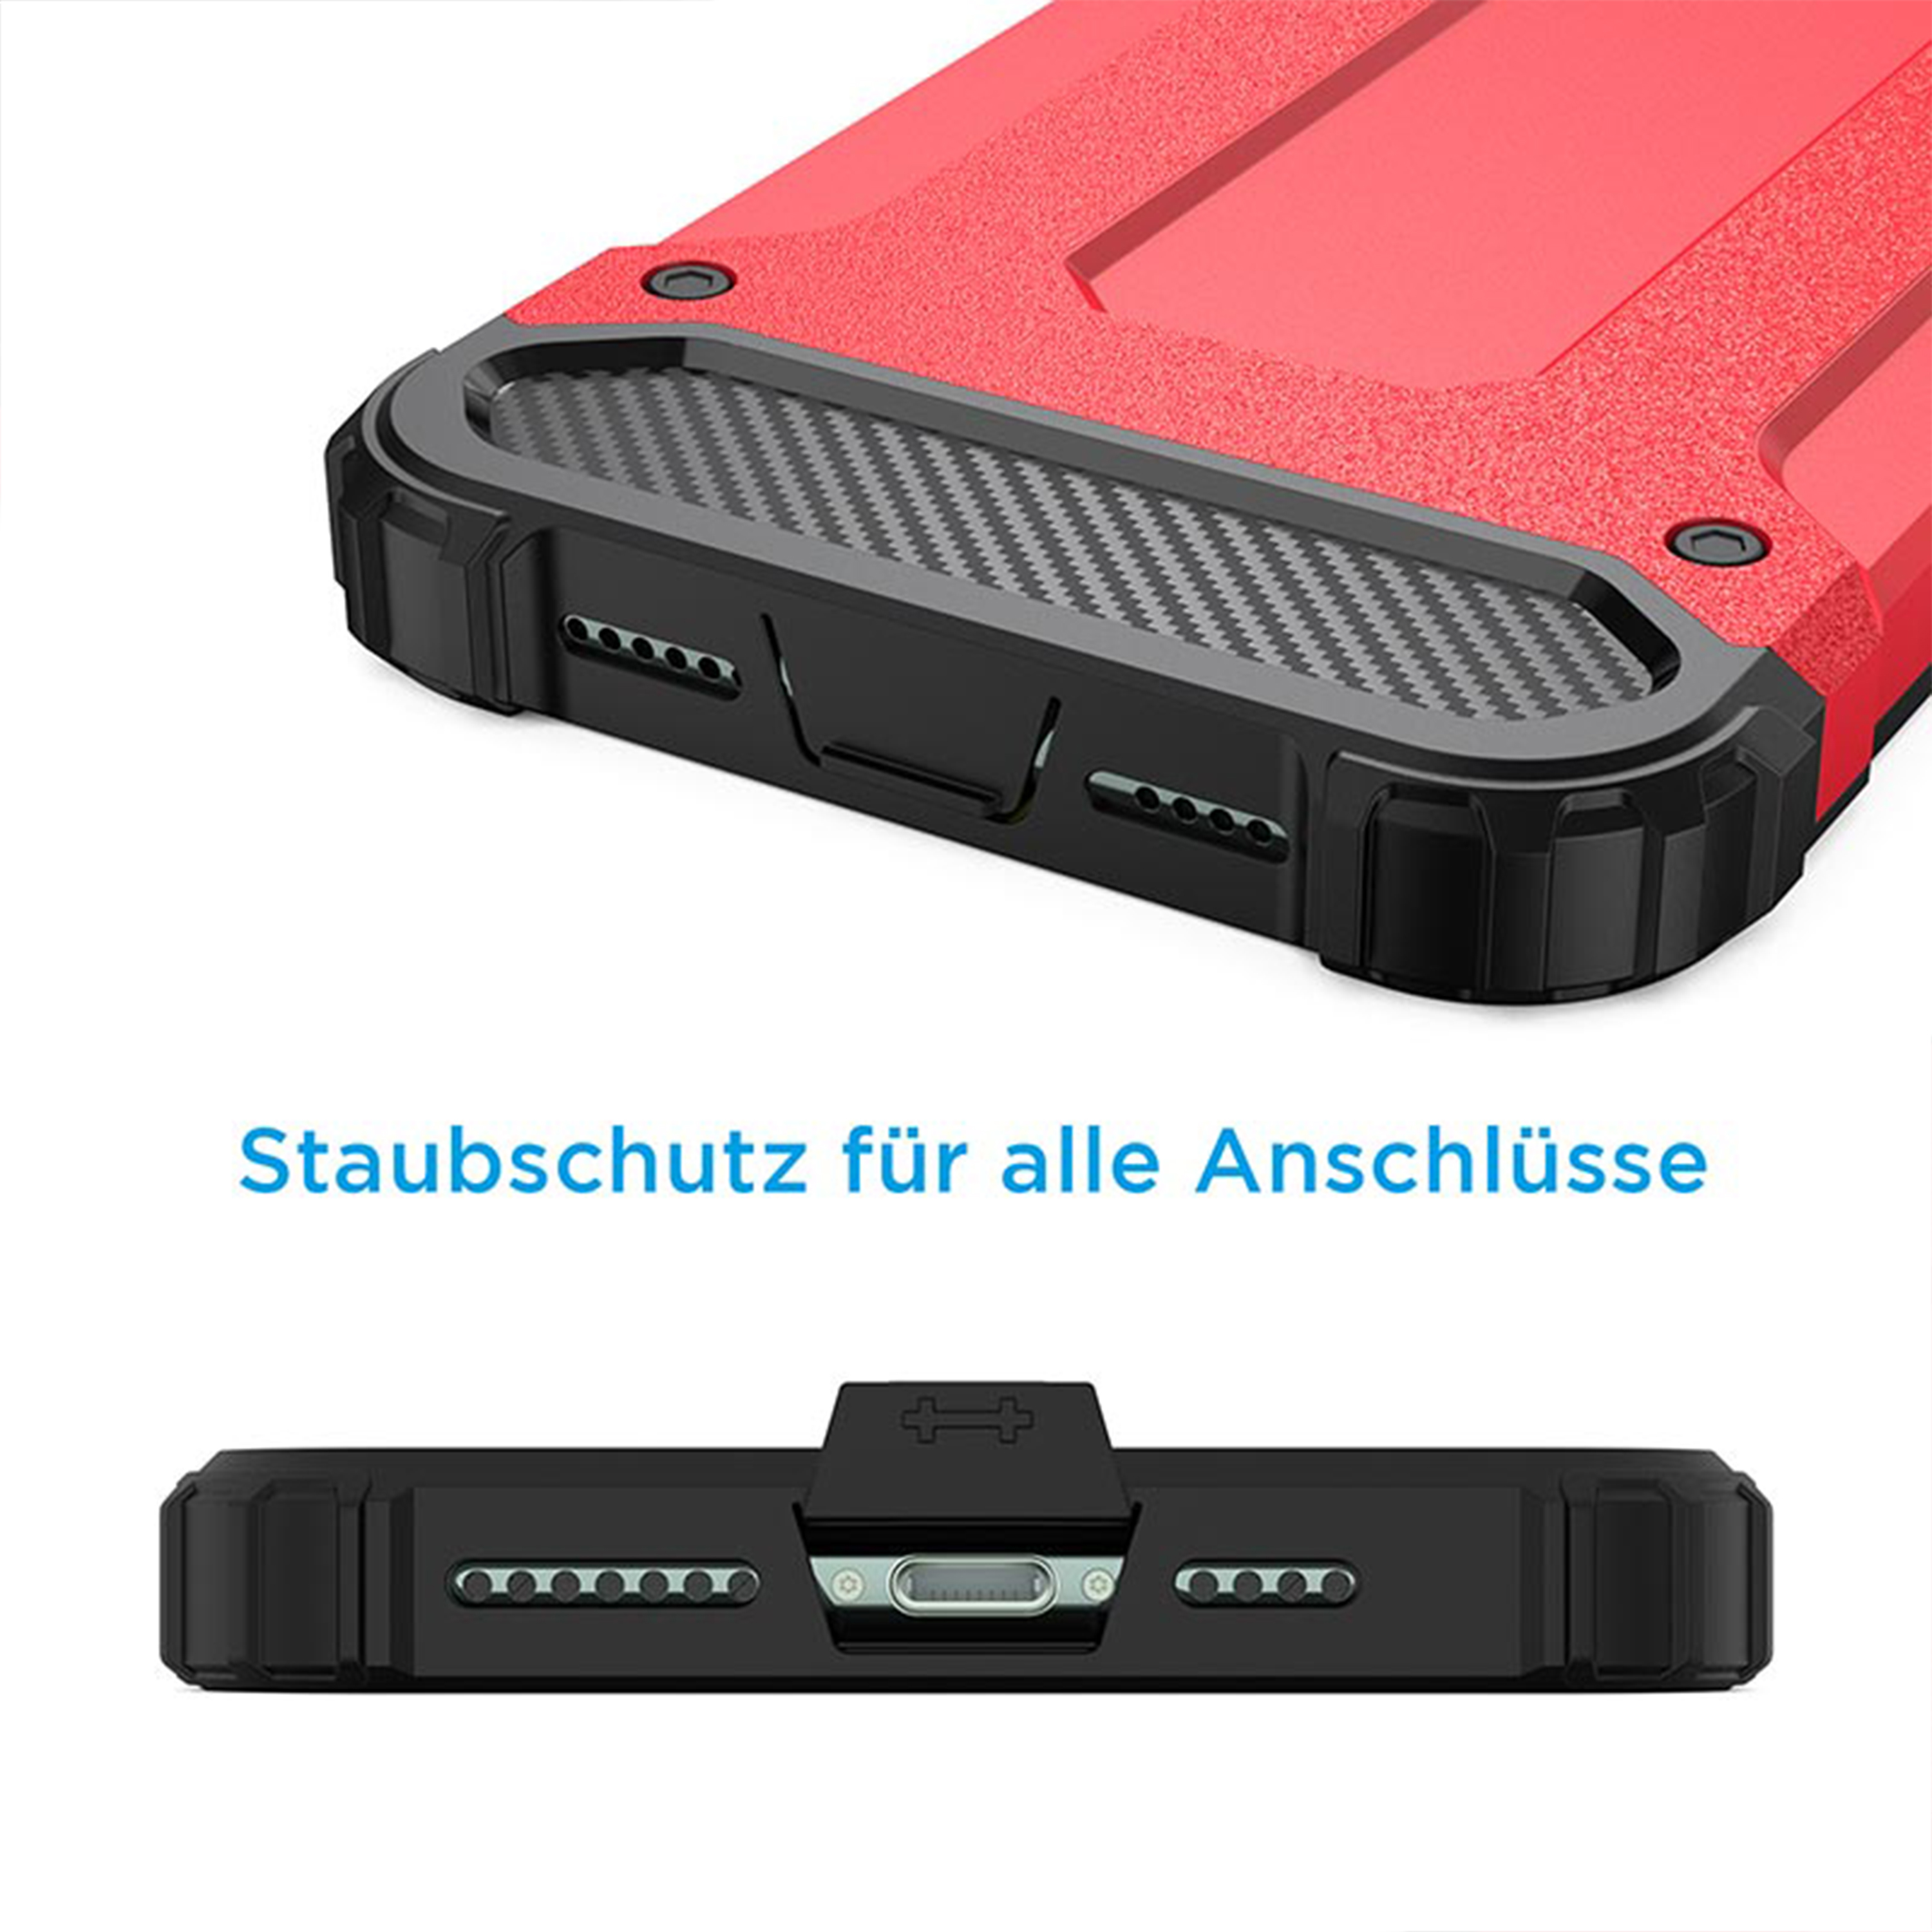 PRO iPhone, Handyhülle MAX, HBASICS Backcover, 11 11 Rot IPhone Armor MAX, PRO für